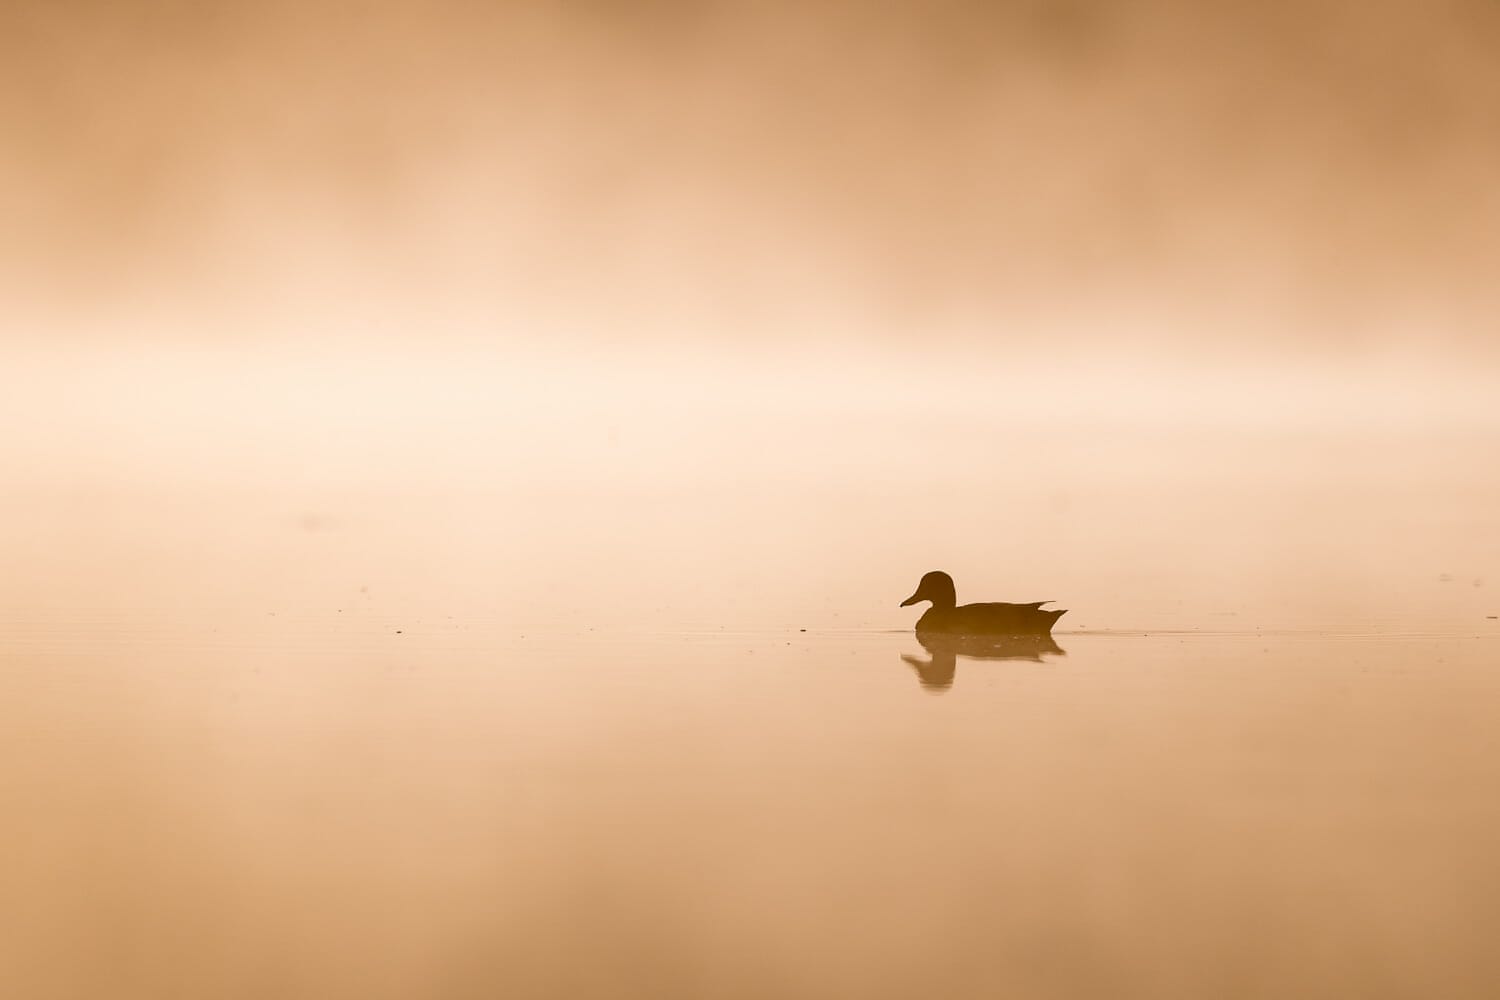 A solitary duck silhouetted against a golden-hued water surface at dusk.